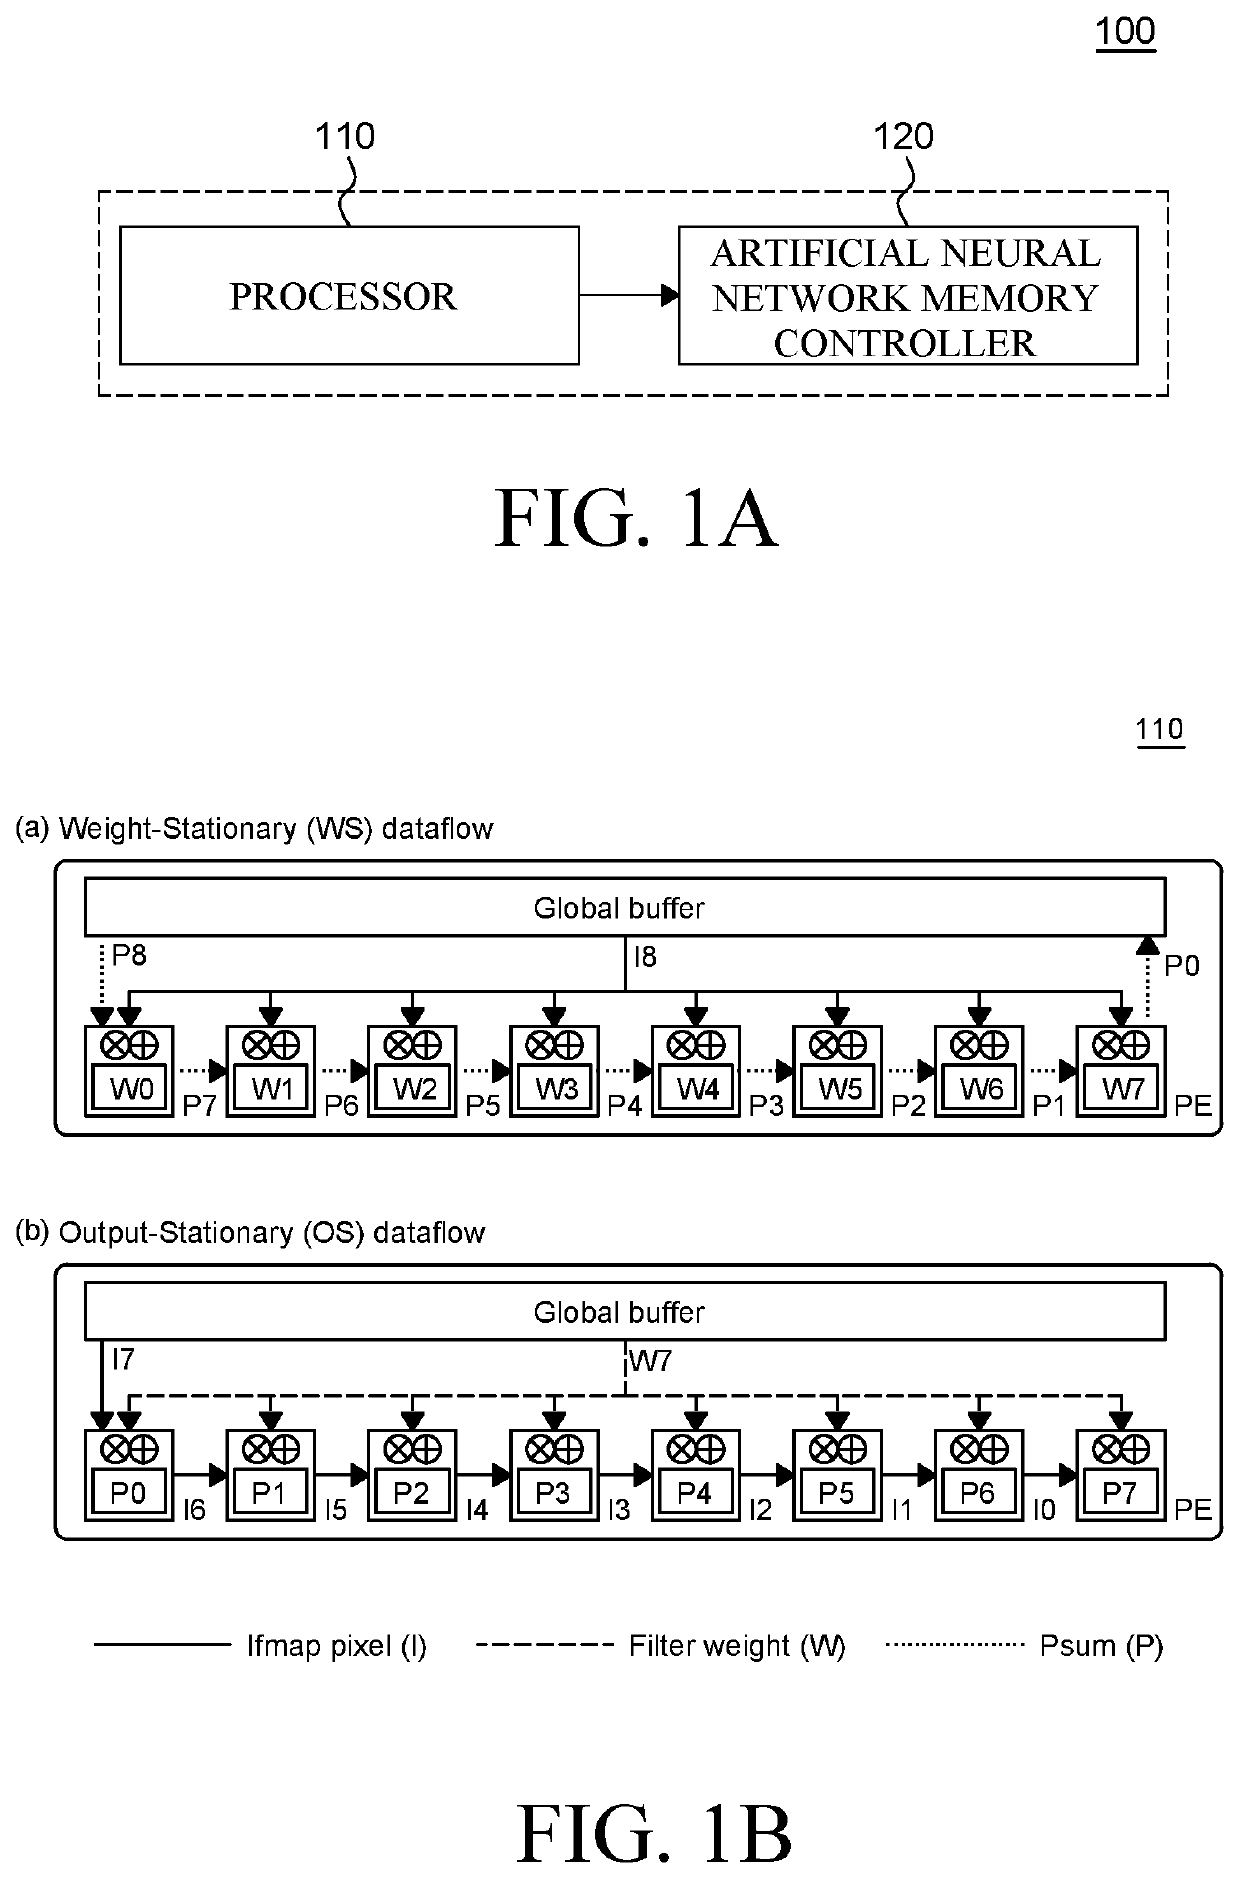 Memory system of an artificial neural network based on a data locality of an artificial neural network